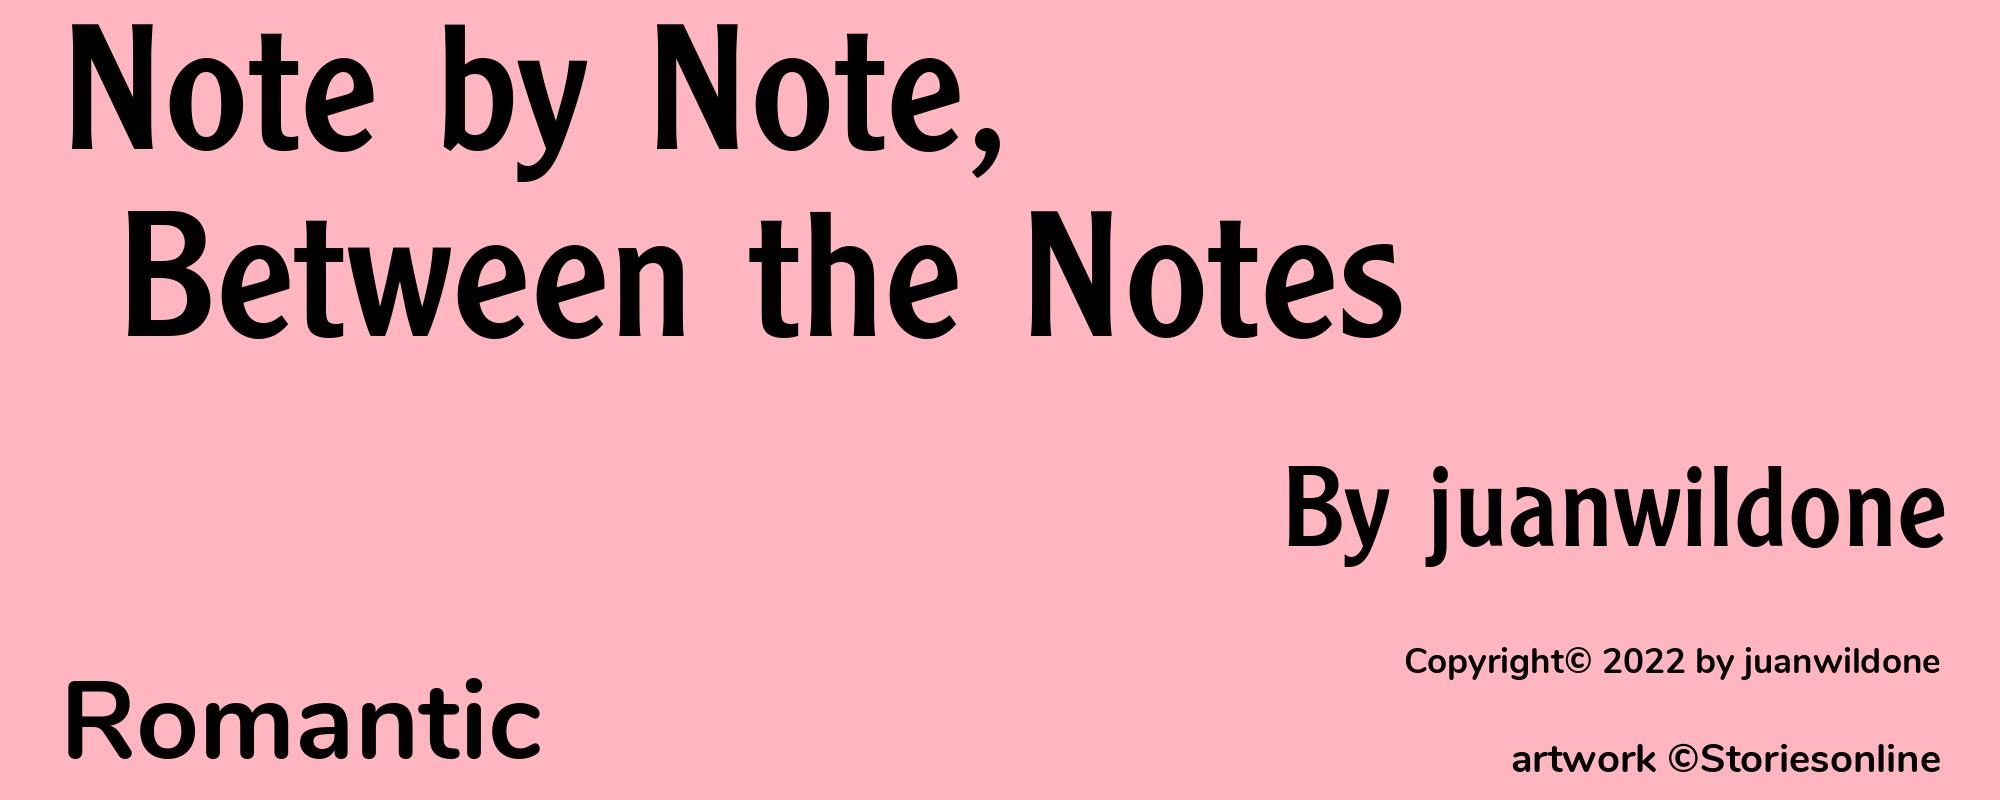 Note by Note, Between the Notes - Cover